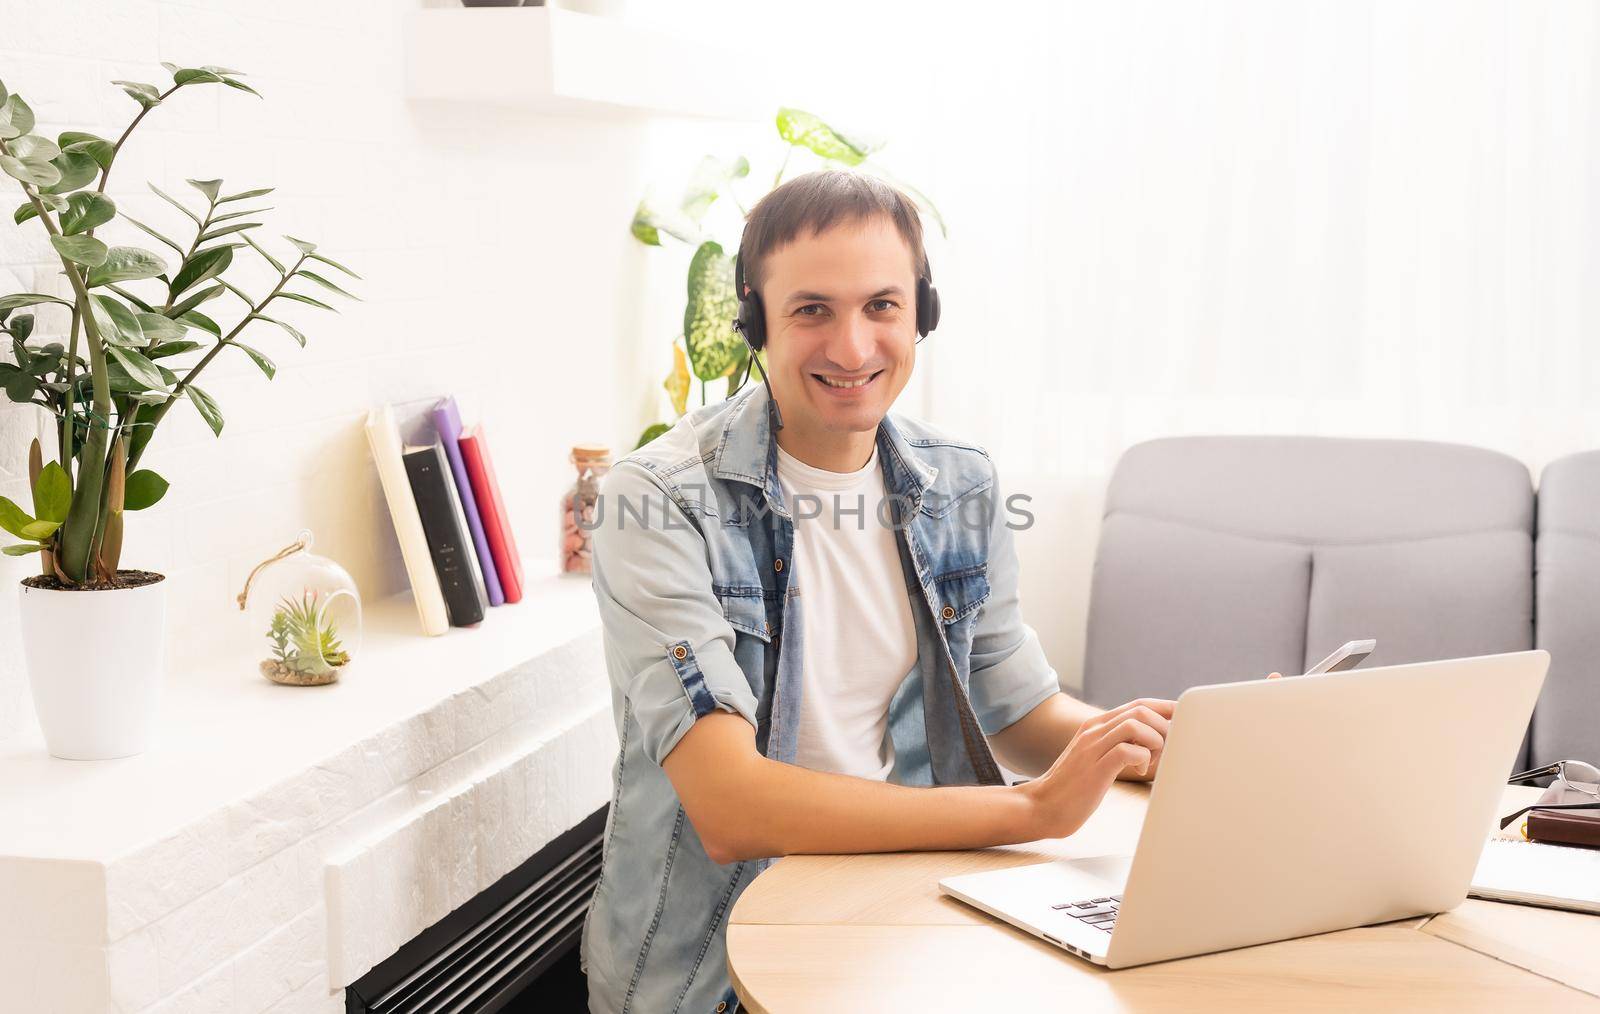 Man Using Laptop On Desk At Home